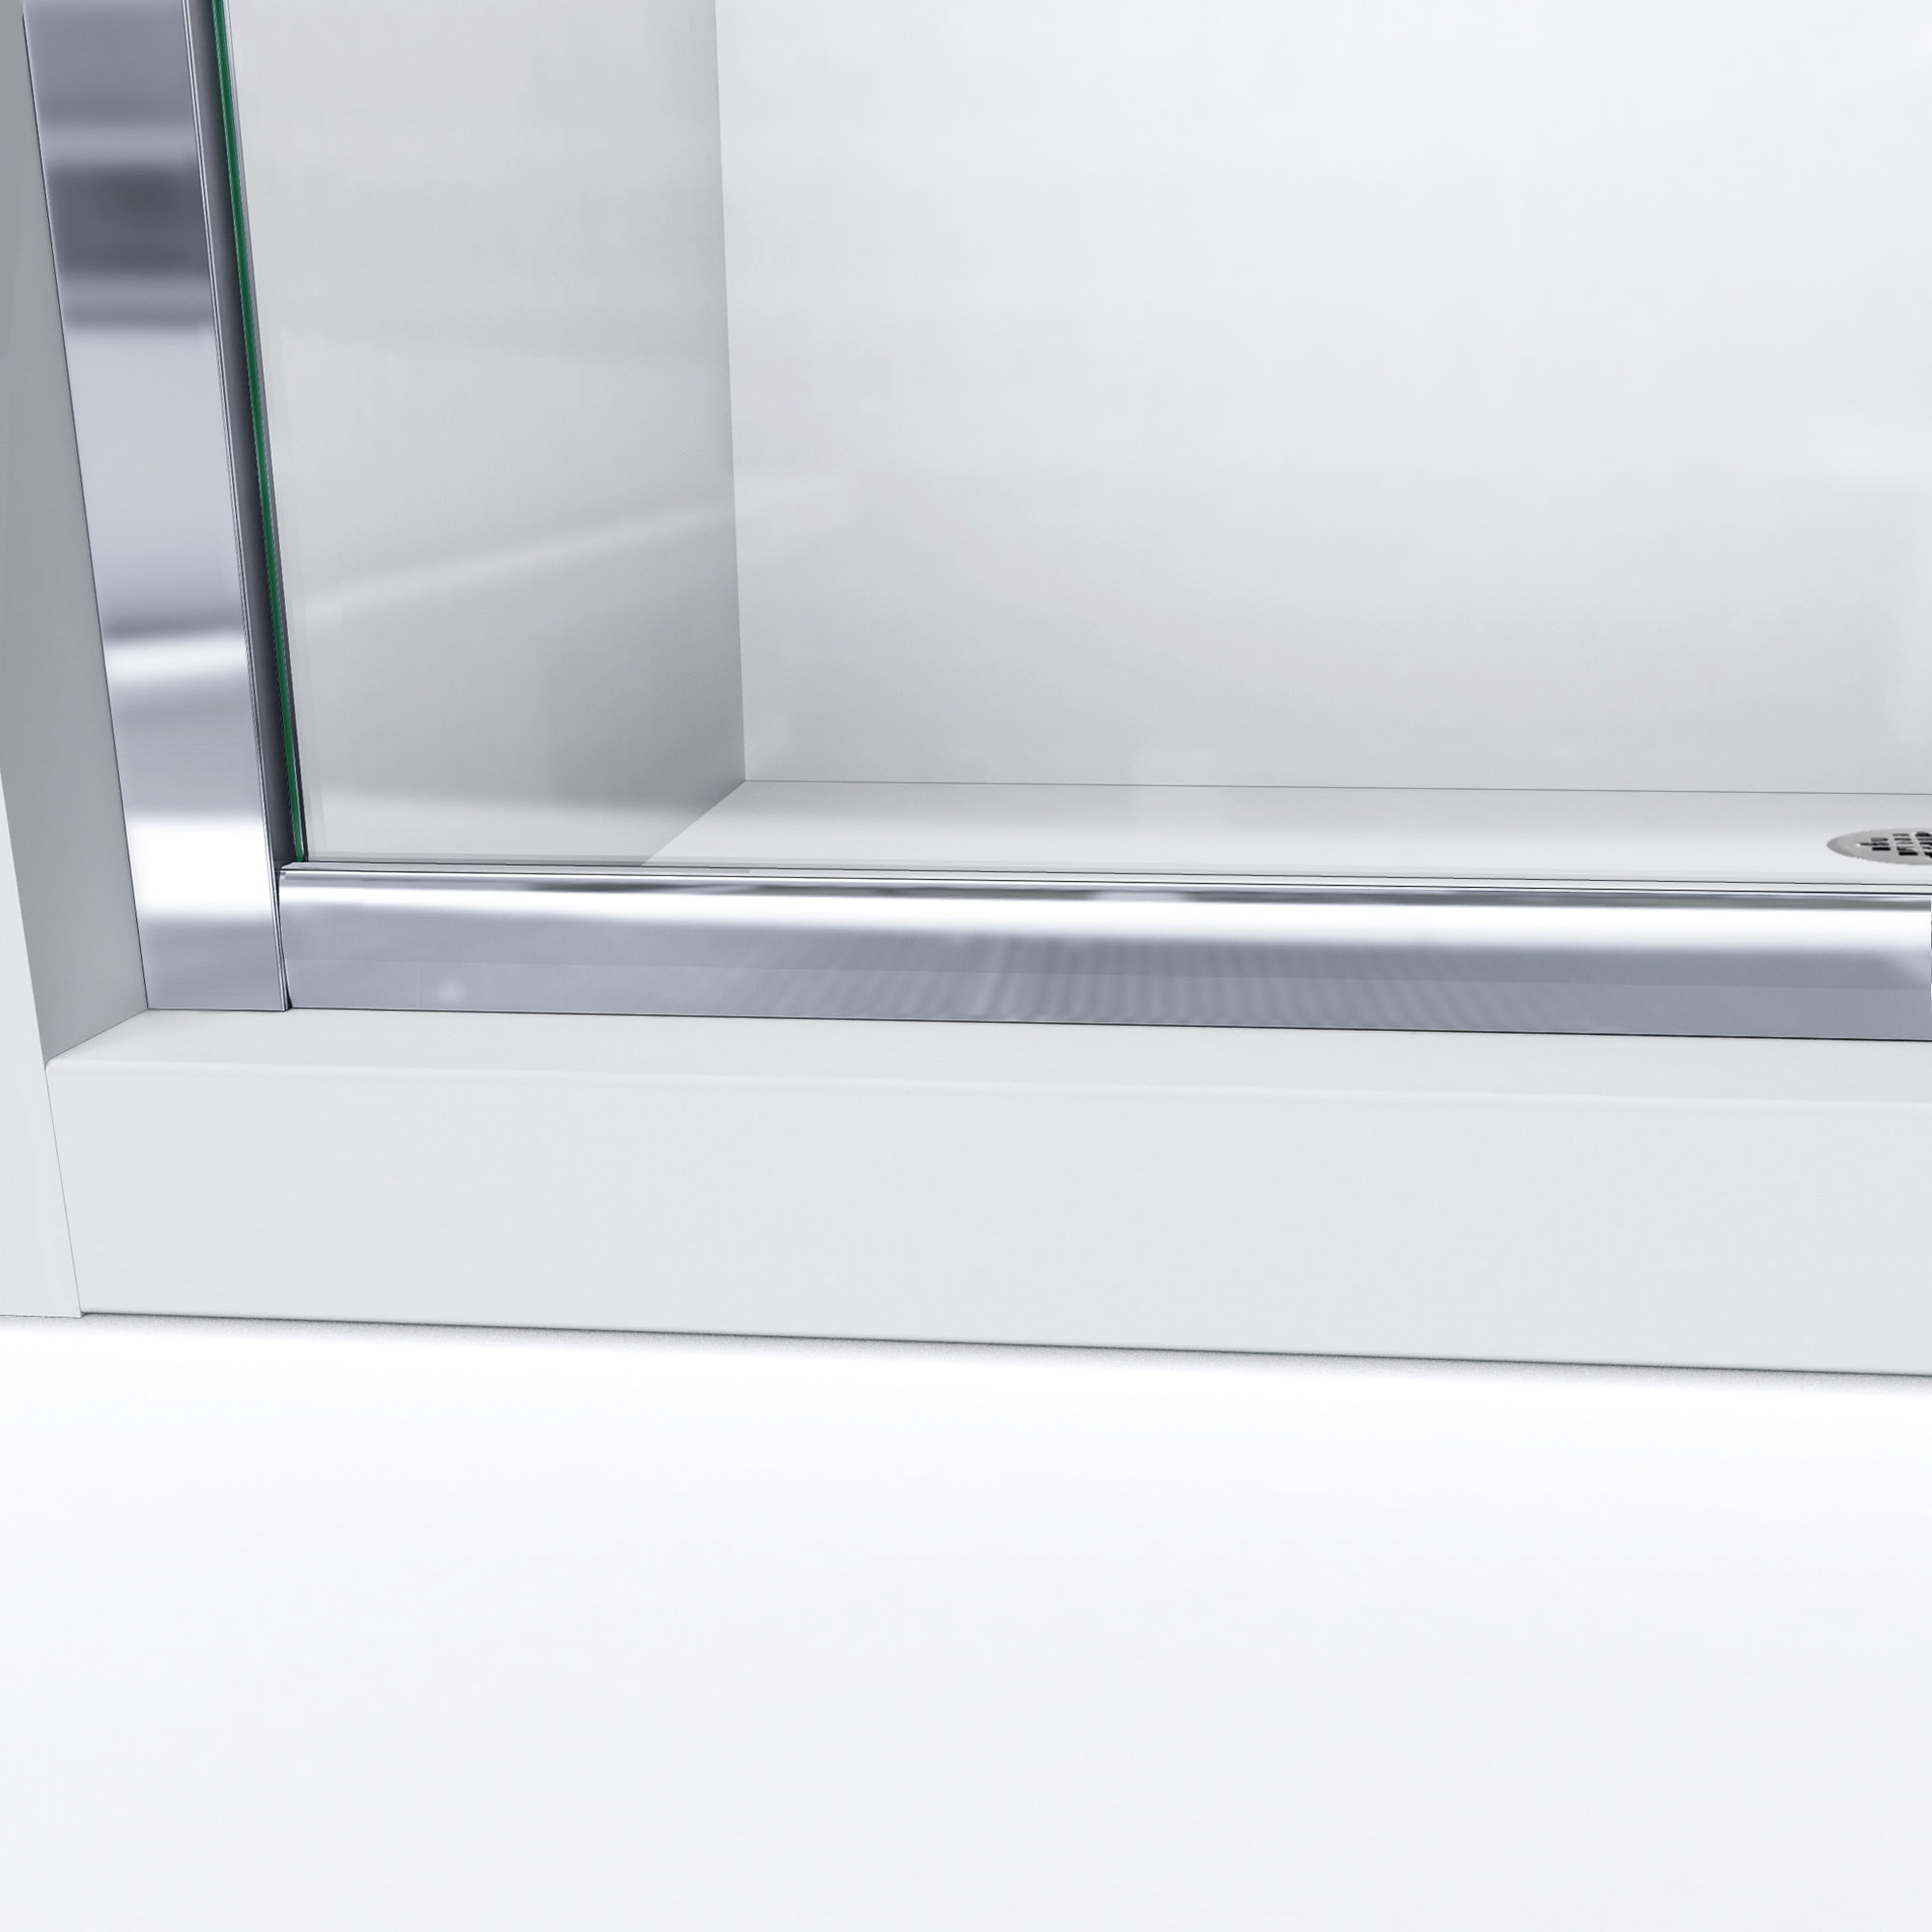 DreamLine Infinity-Z 56-60 in. W x 60 in. H Clear Sliding Tub Door in Brushed Nickel with White Acrylic Backwall Kit - image 5 of 14